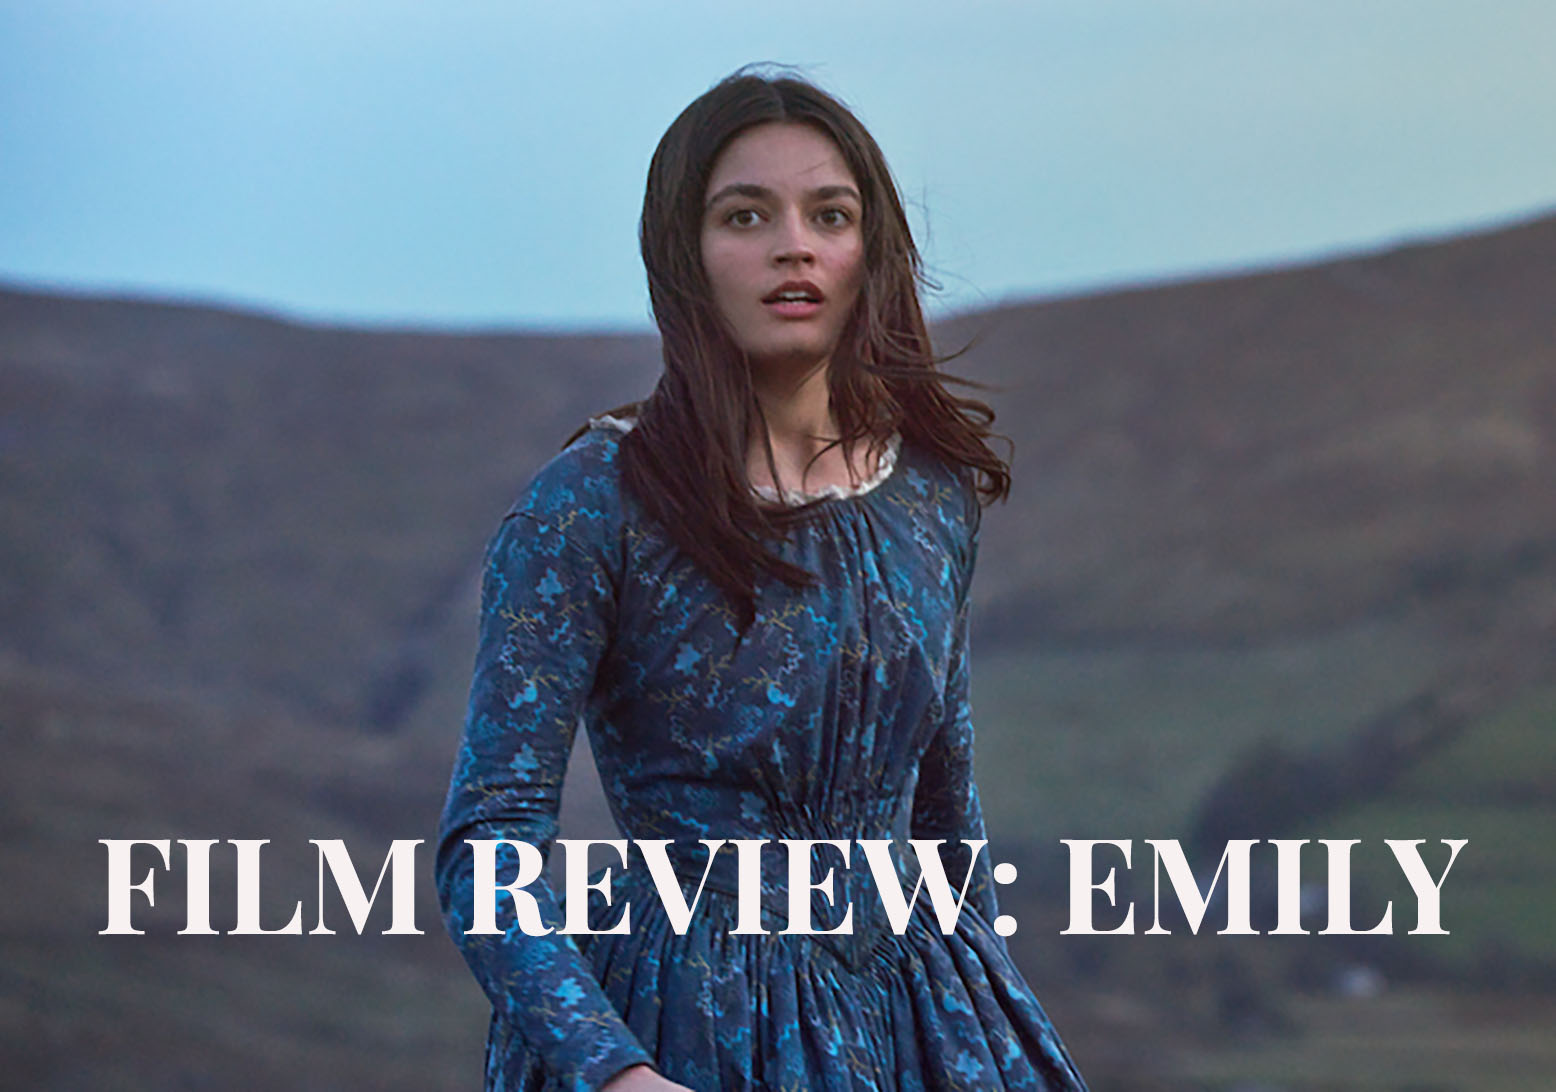 movie review of emily